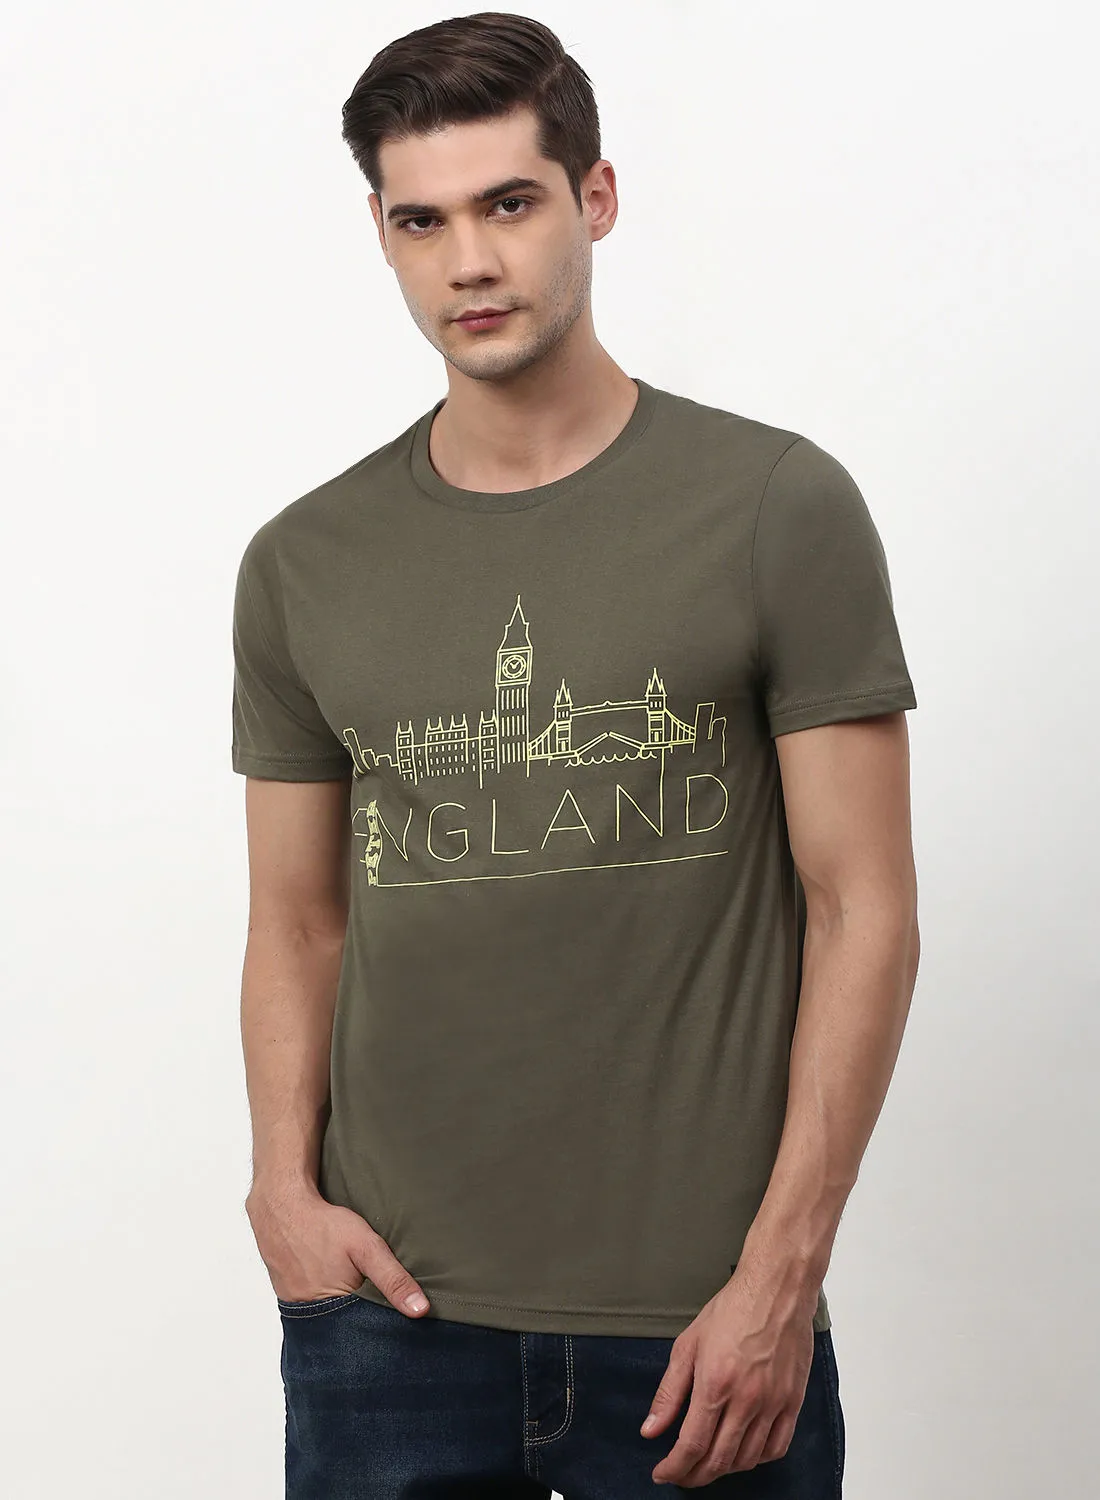 ABOF Graphic Printed Regular Fit Crew Neck T-Shirt Olive Green